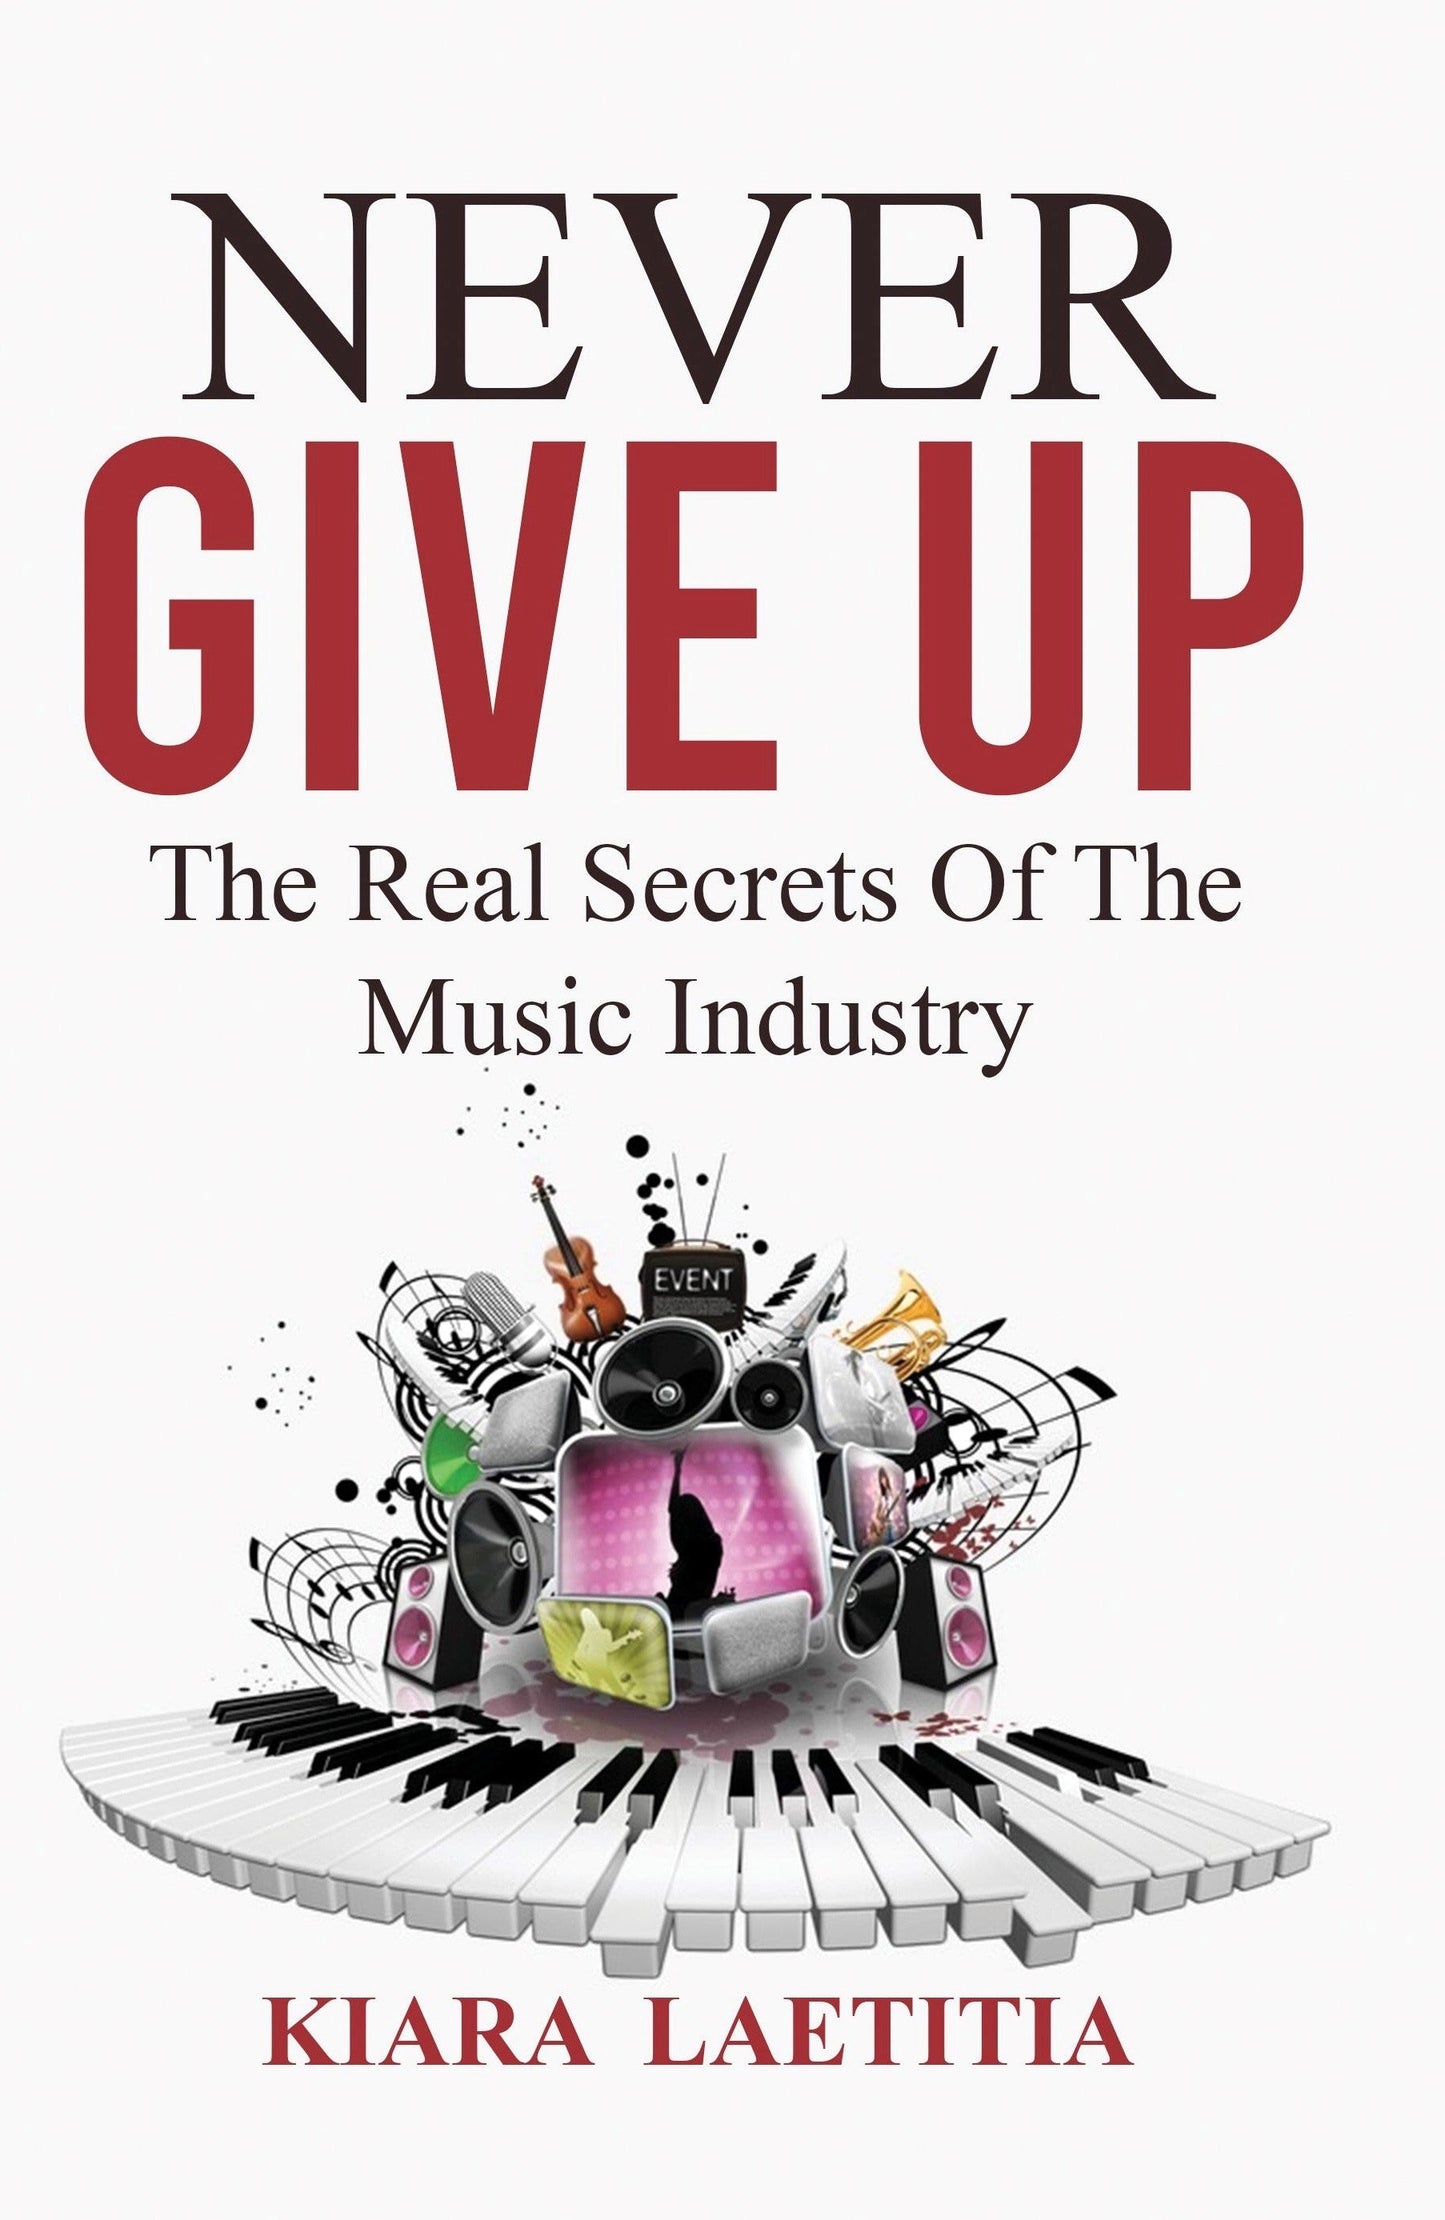 Ebook - Never Give Up The Real Secrets Of The Music Industry